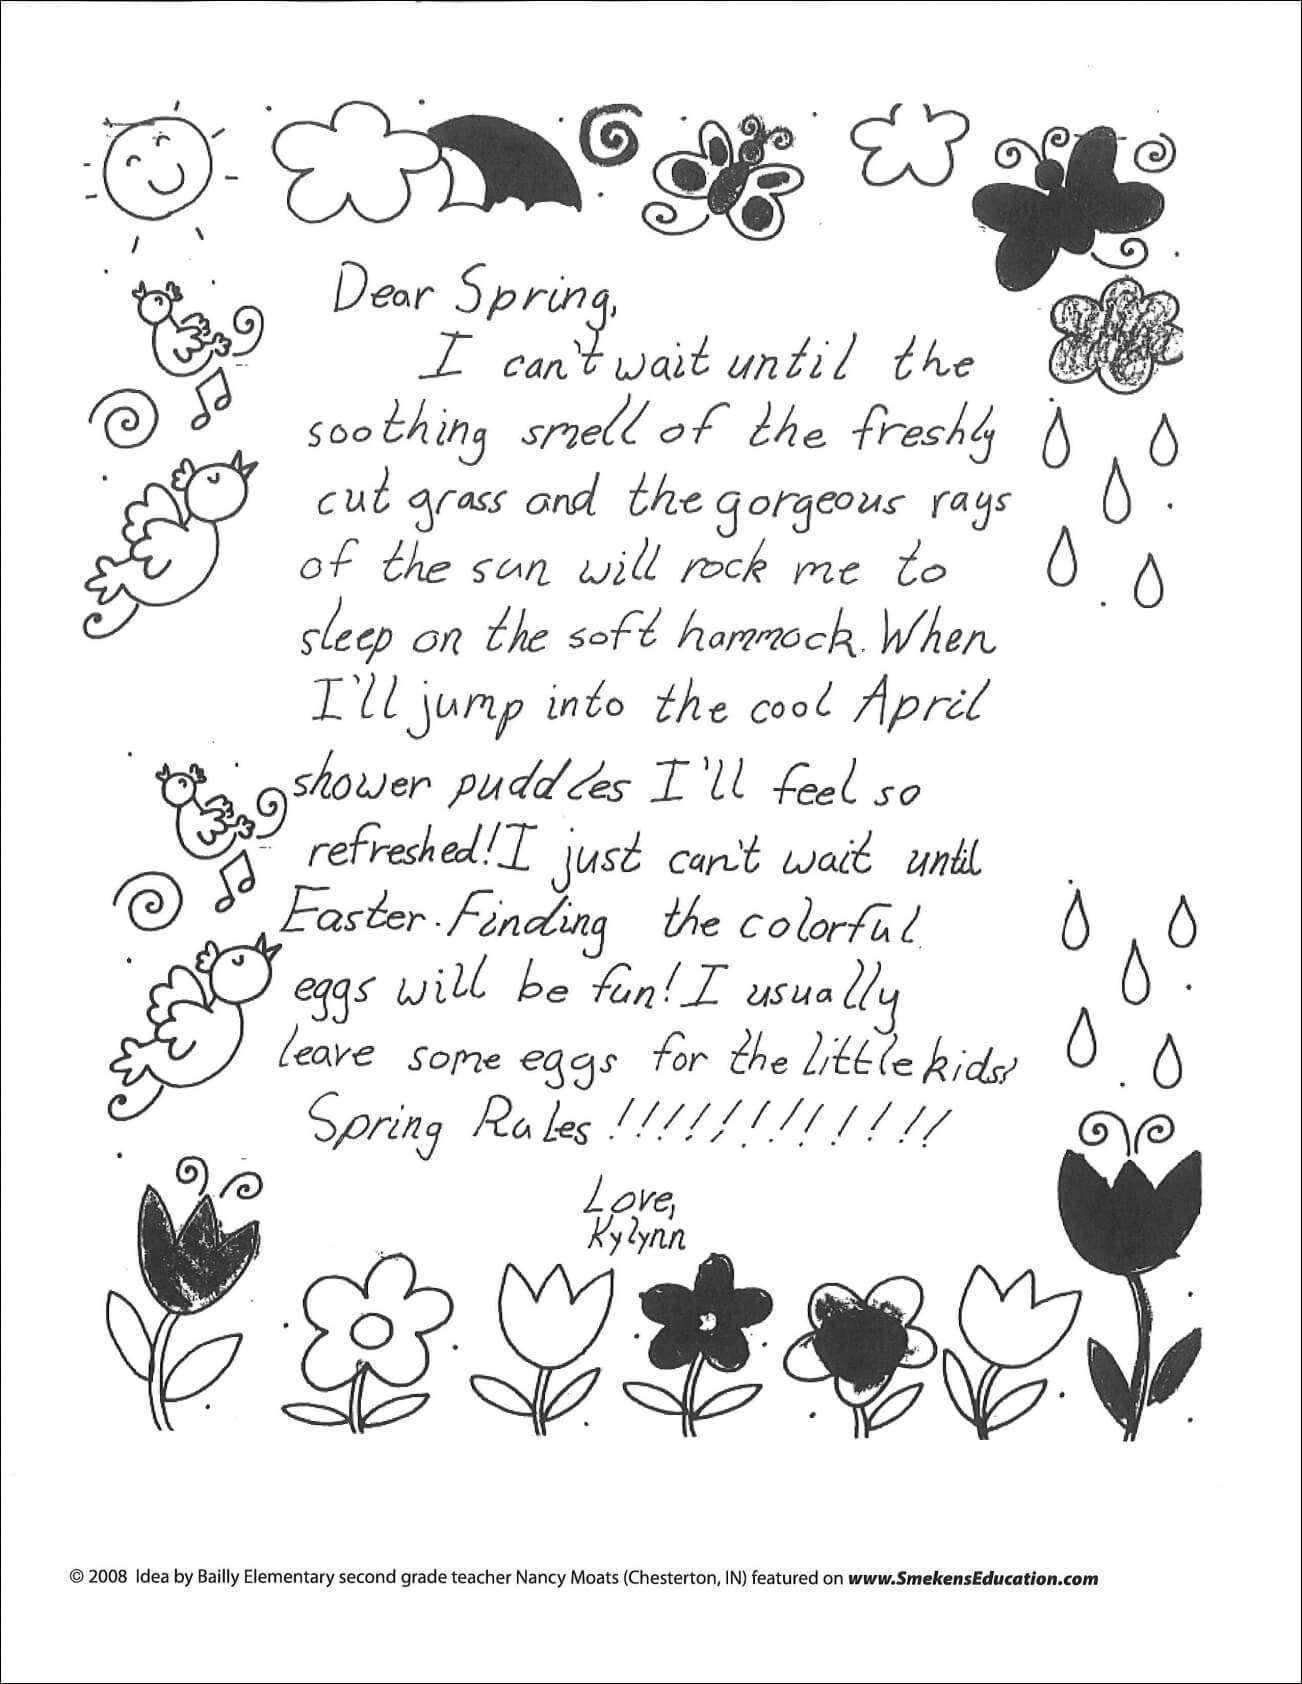 Spring Letter - Build a Sense of Audience with Letter Writing